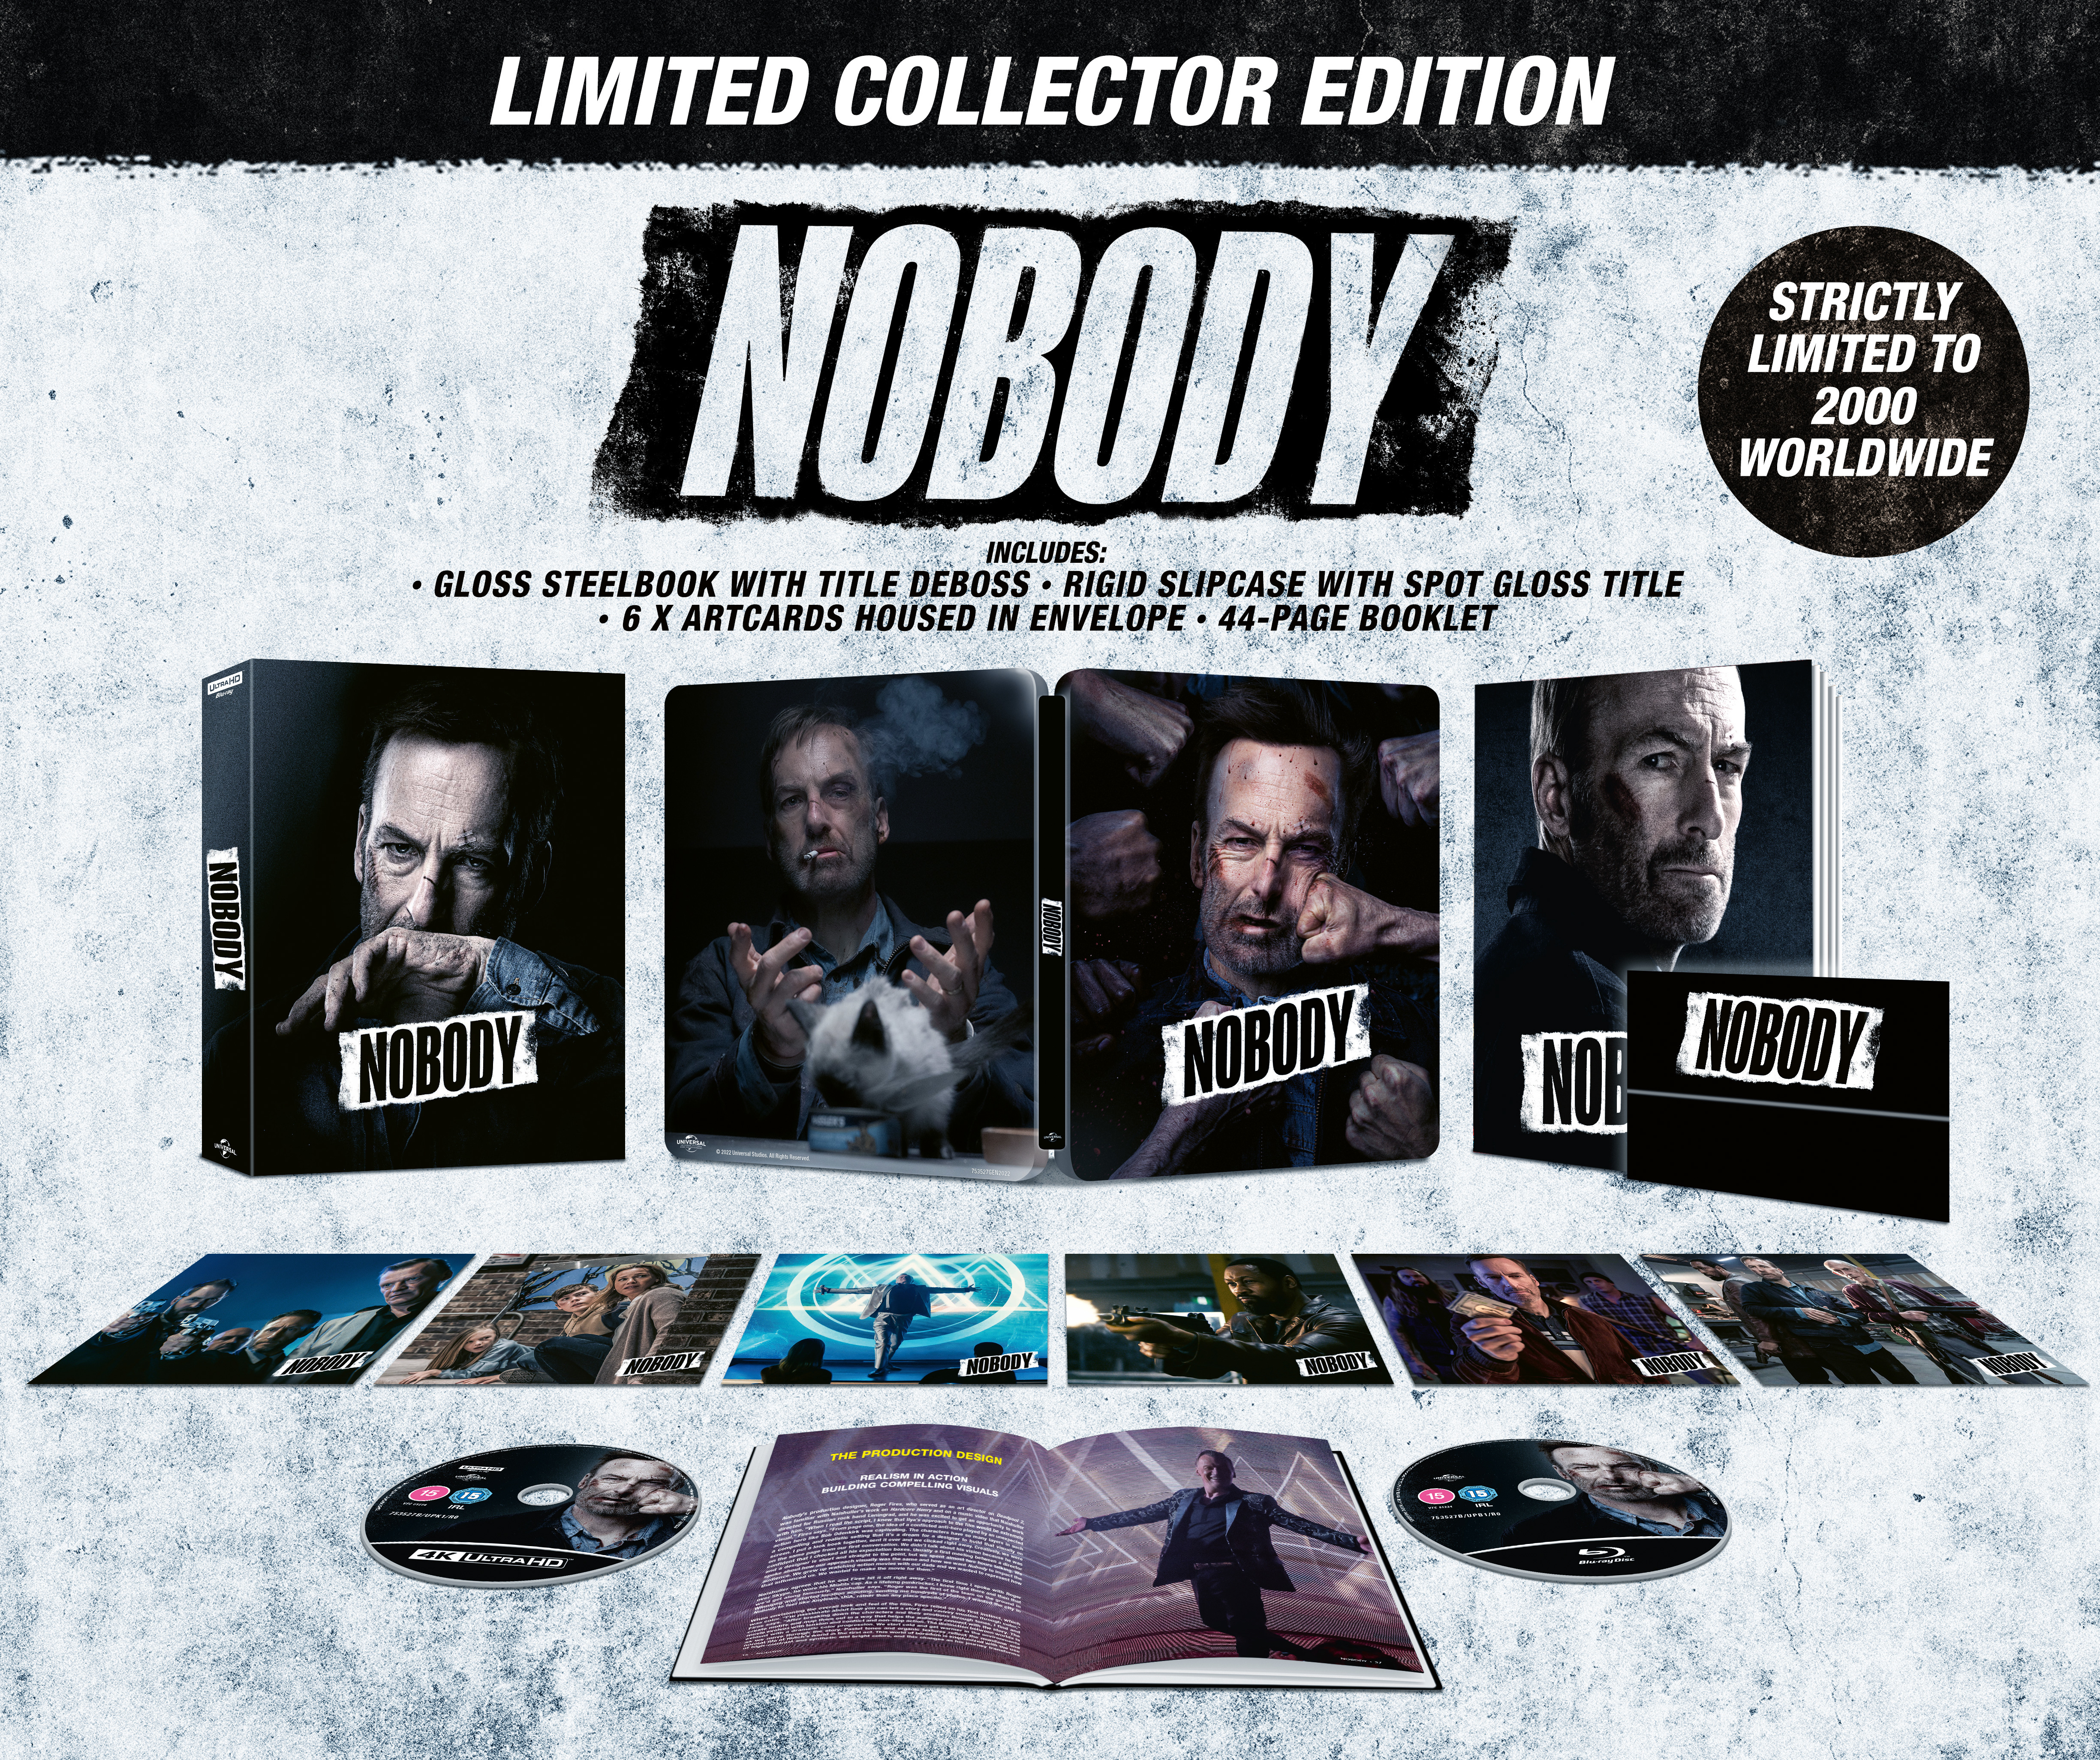 Limited Collectors Edition. Strictly Limited to 2000 Worldwide. Includes Gloss Steelbook. Rigid Slipcase with Spot Gloss Title. 6 Artcards Housed in Envelope. 44 Page Booklet.